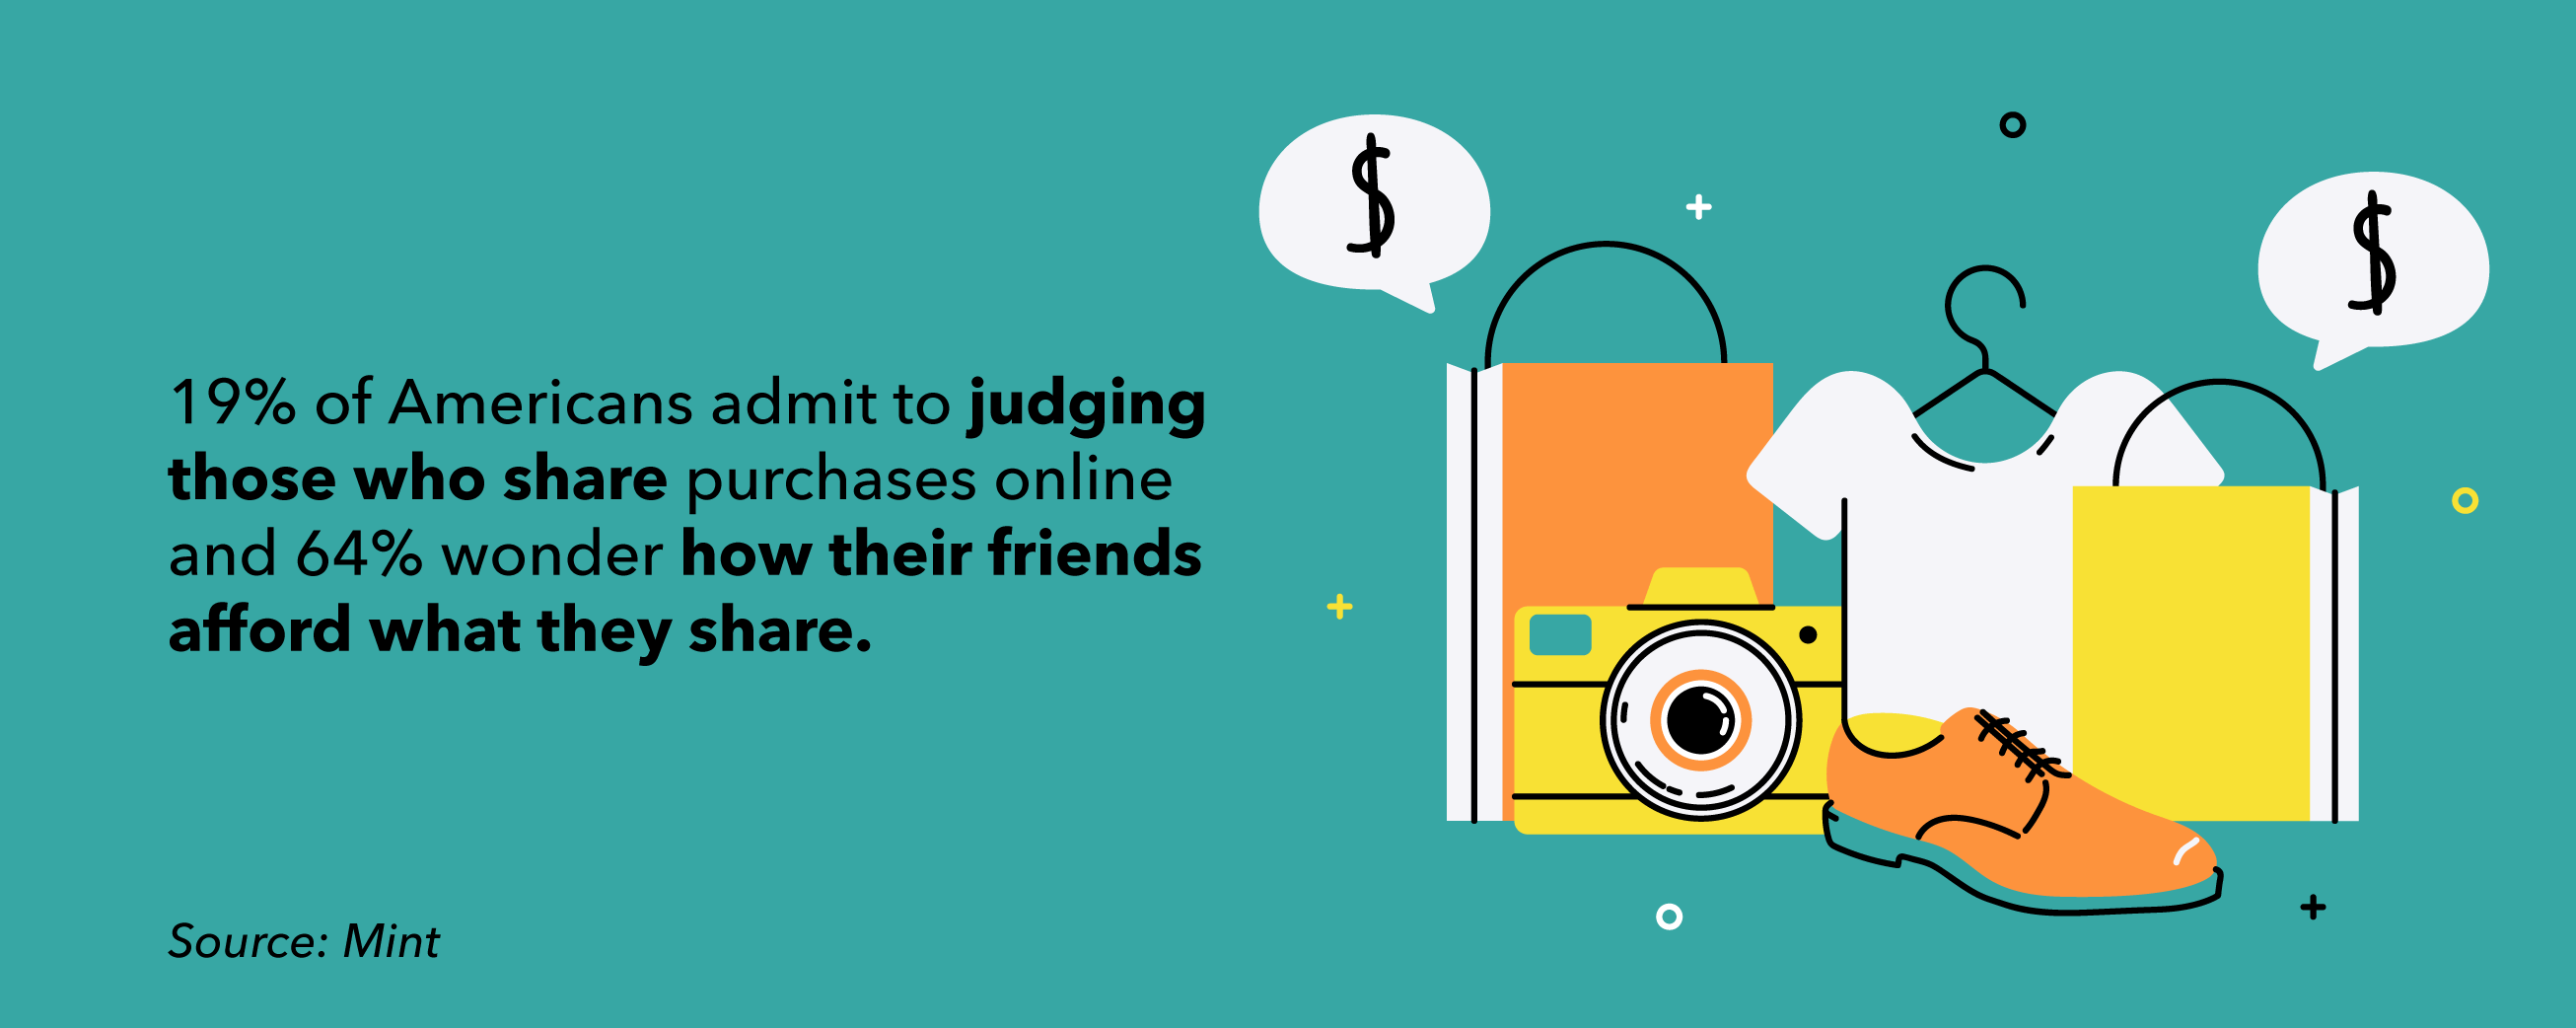 20% of users rate others for sharing their purchases, 64% wonder how their friends are doing these purchases